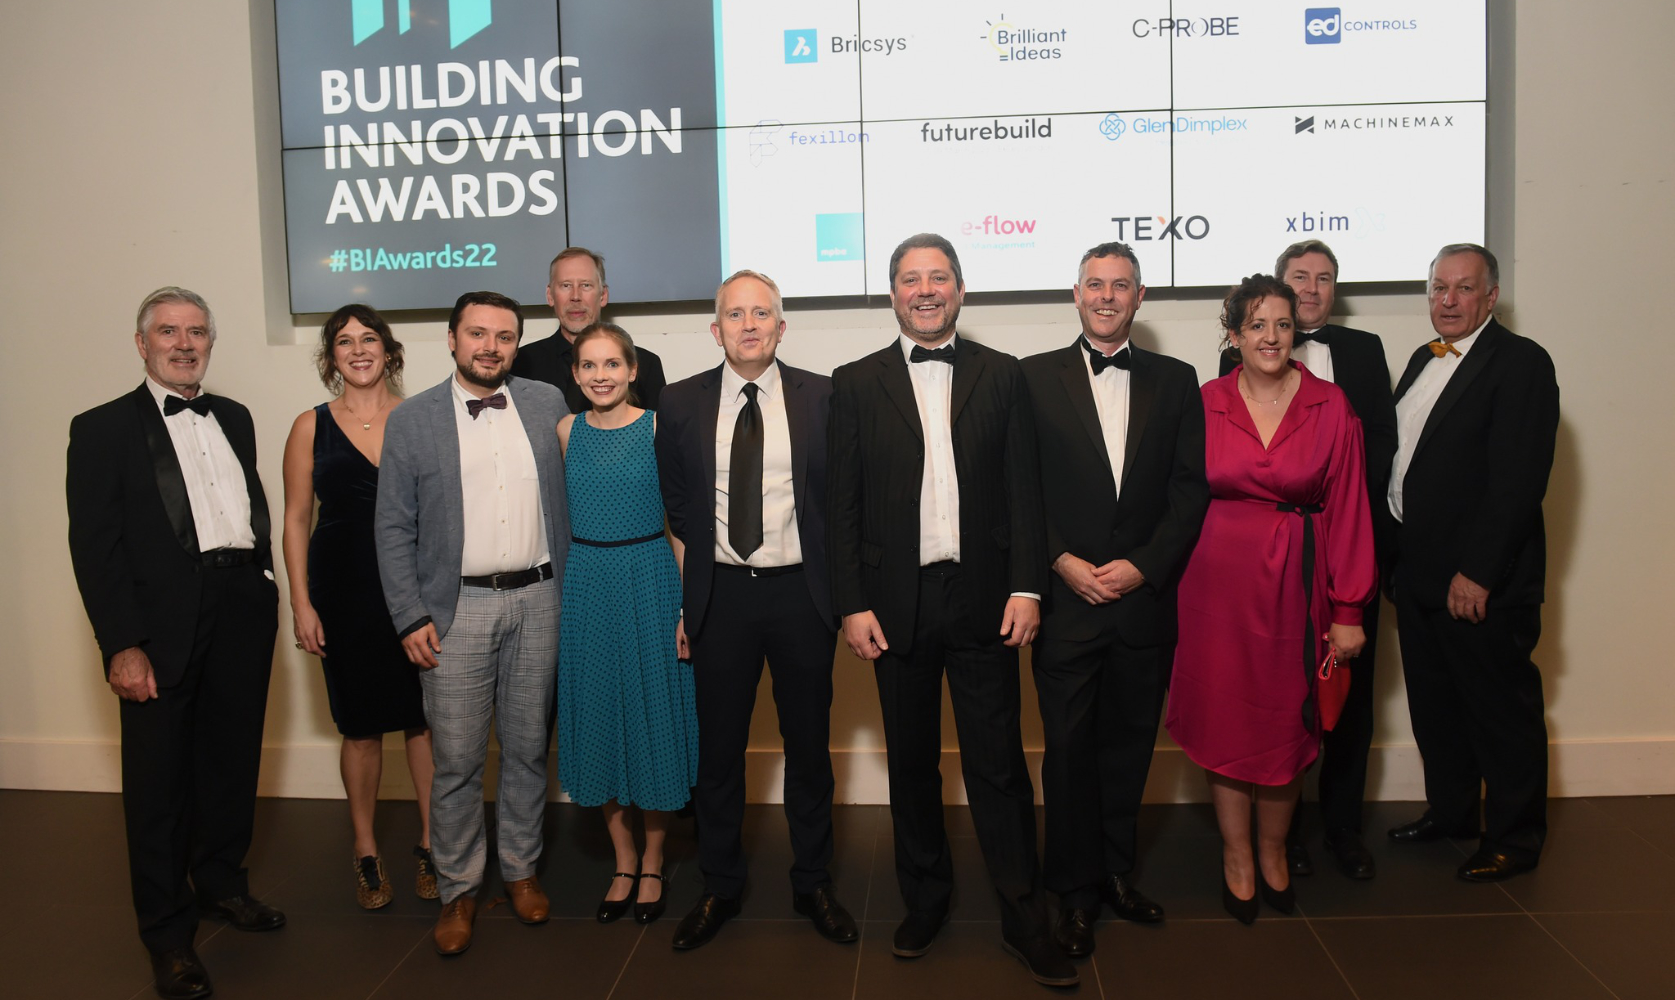 group shot from Building Innovation Awards